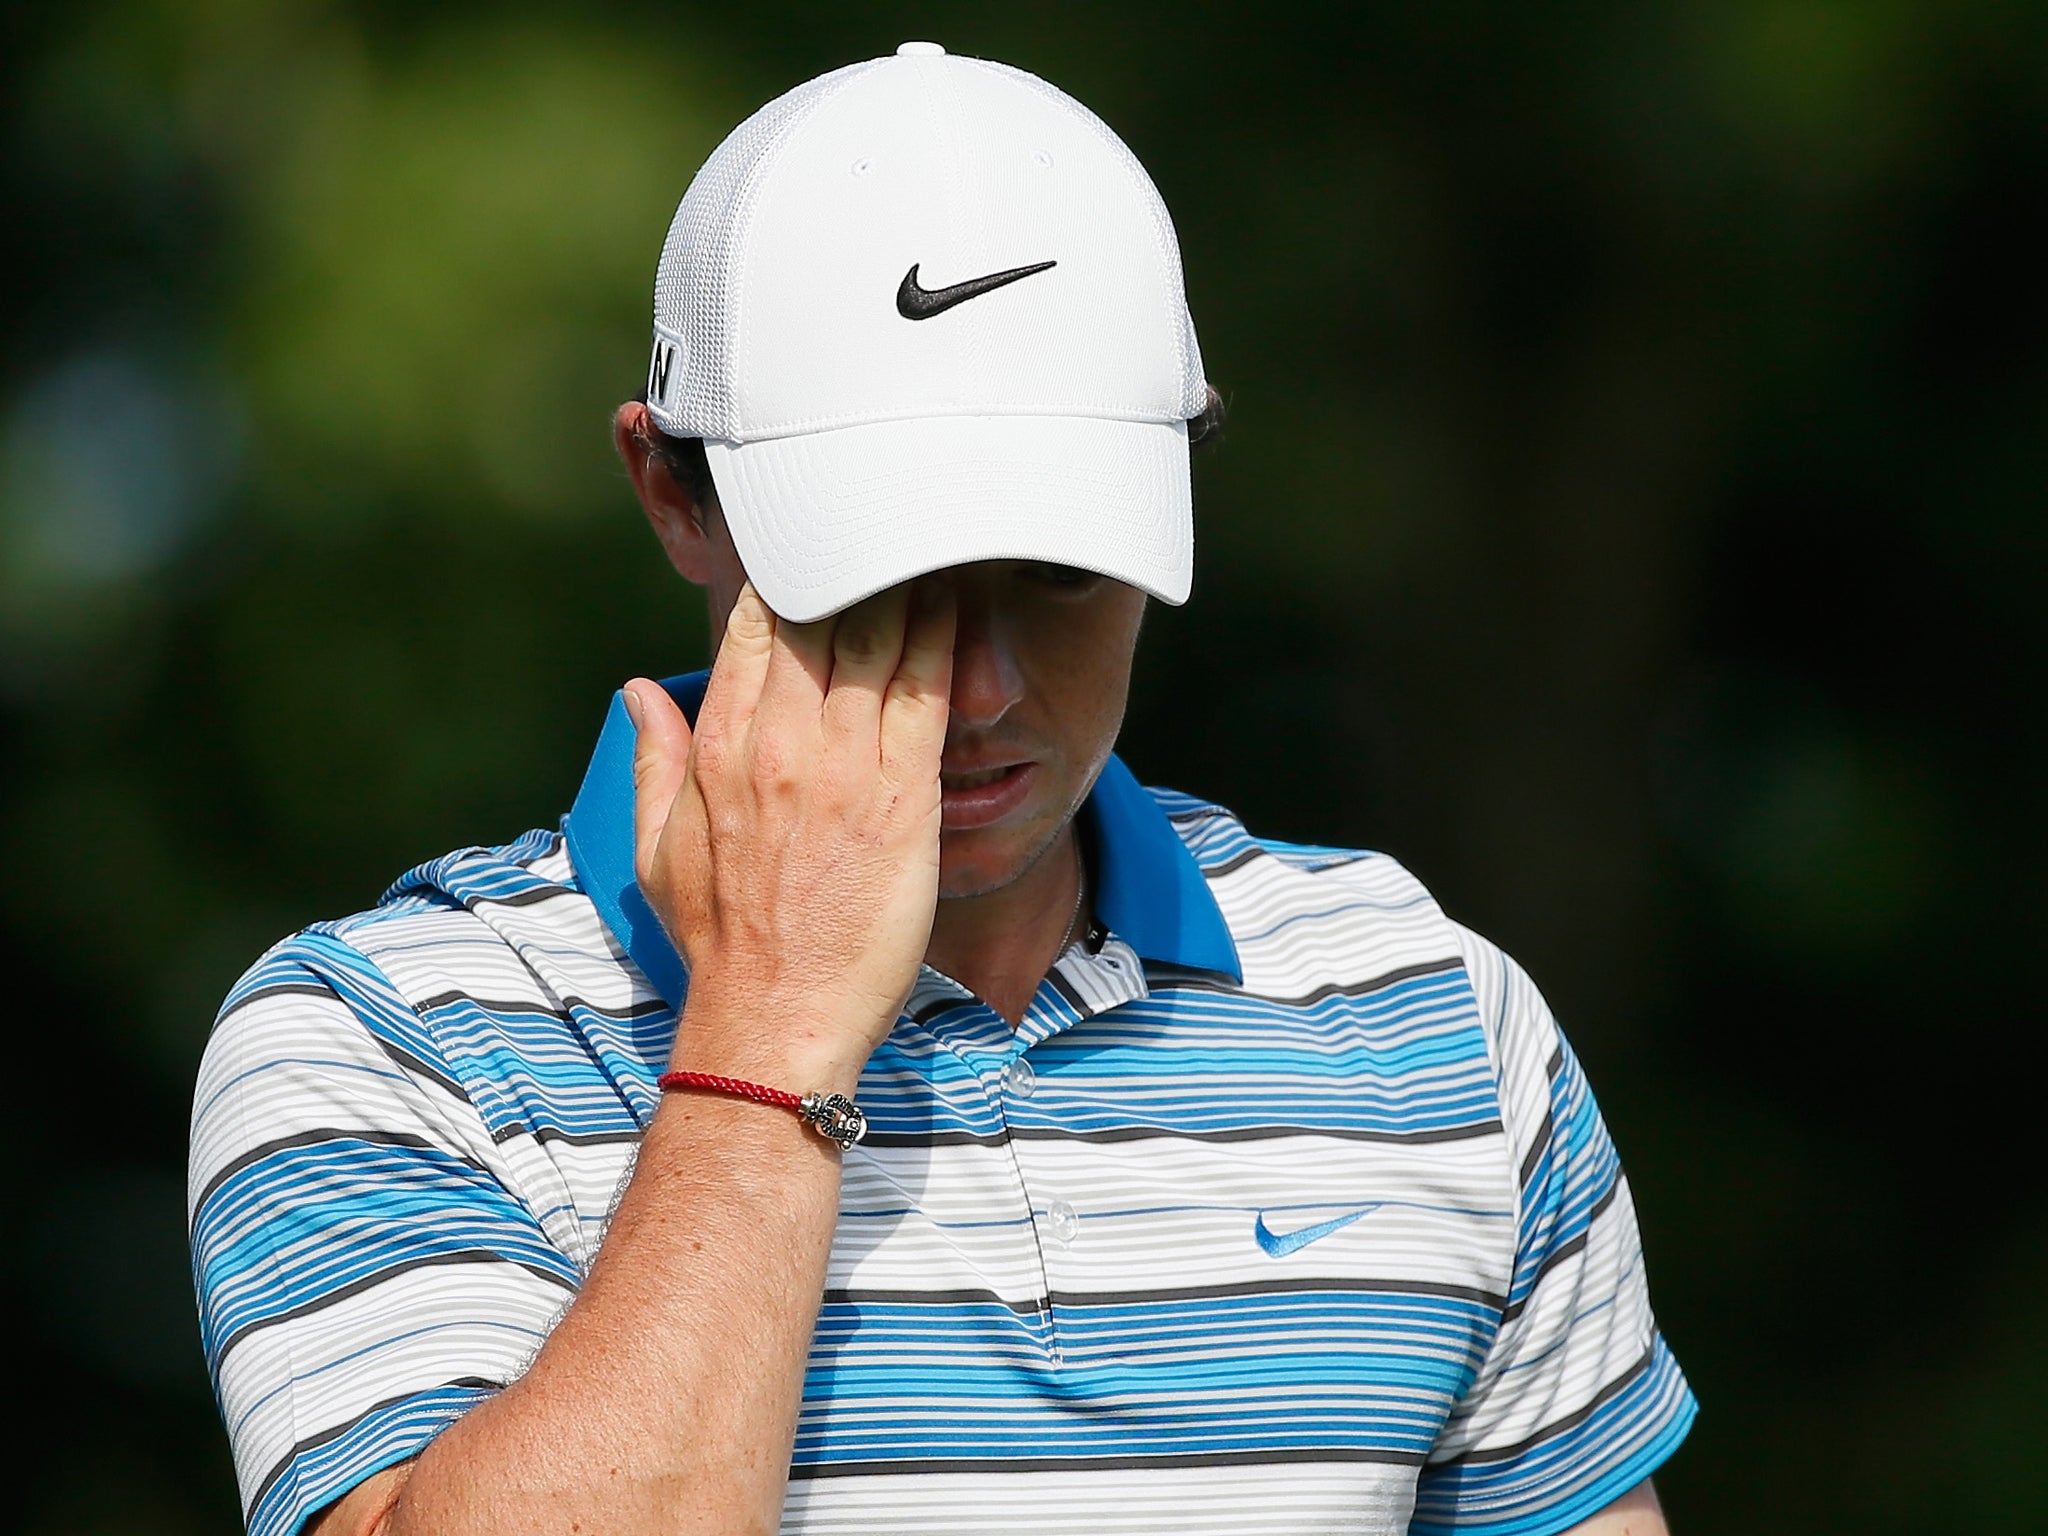 Rory McIlroy appears frustrated at The Players Championship at TPC Sawgrass